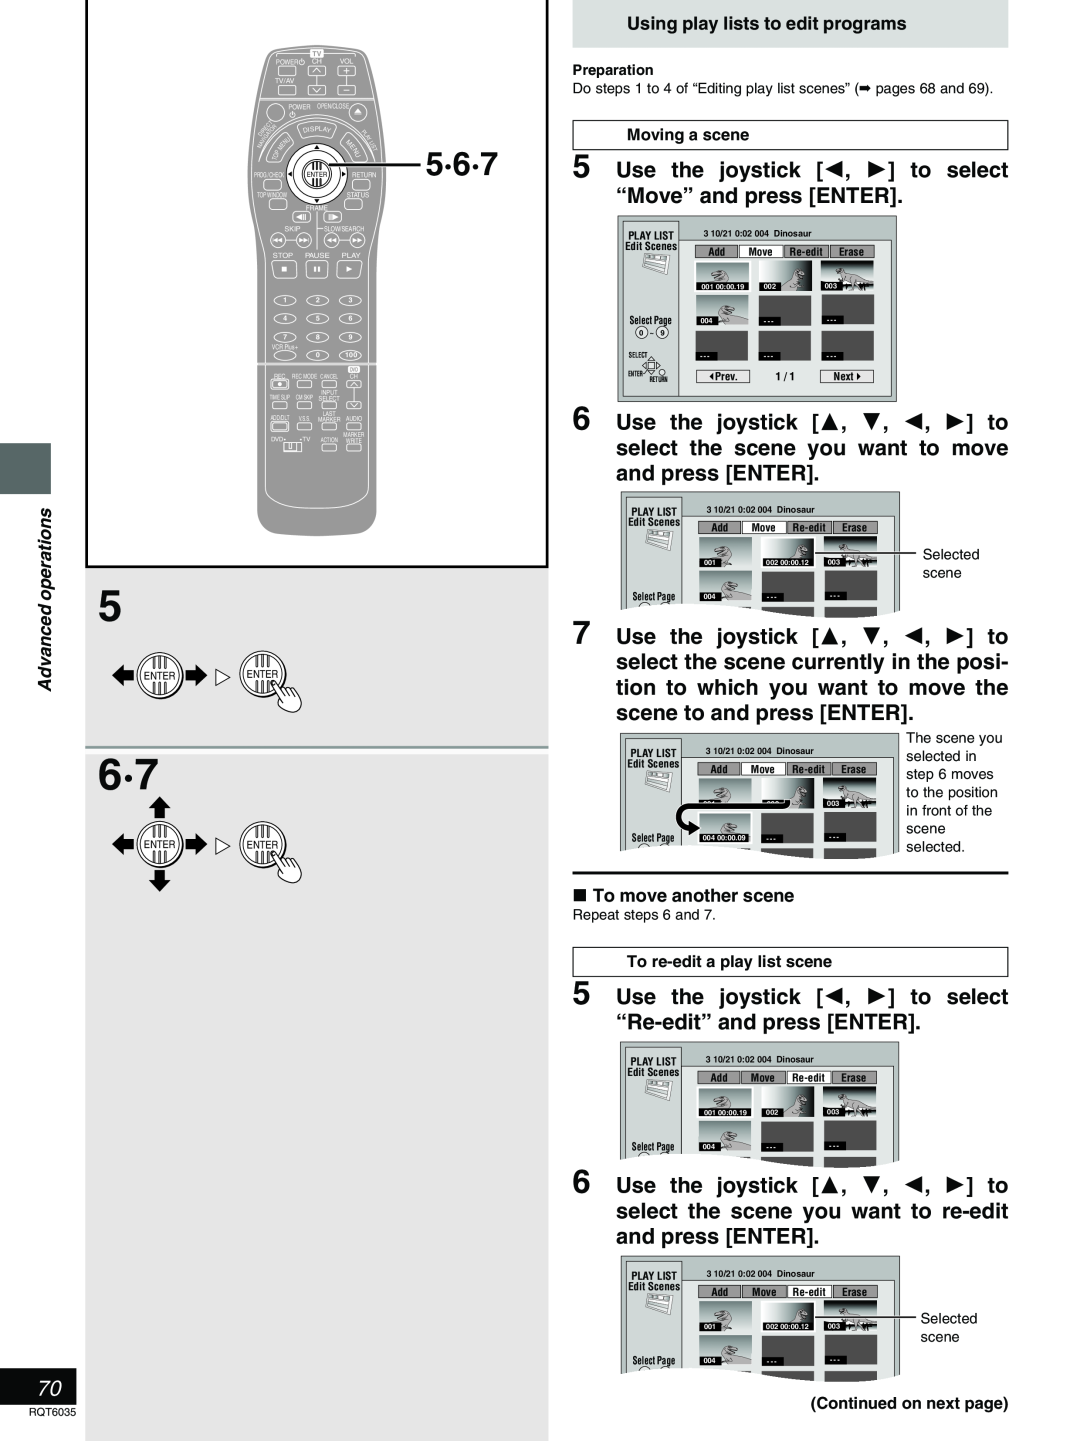 Panasonic DMR-E20 5·6·7, Use the joystick 2, 1 to select, “Move” and press ENTER, operations, º To move another scene 